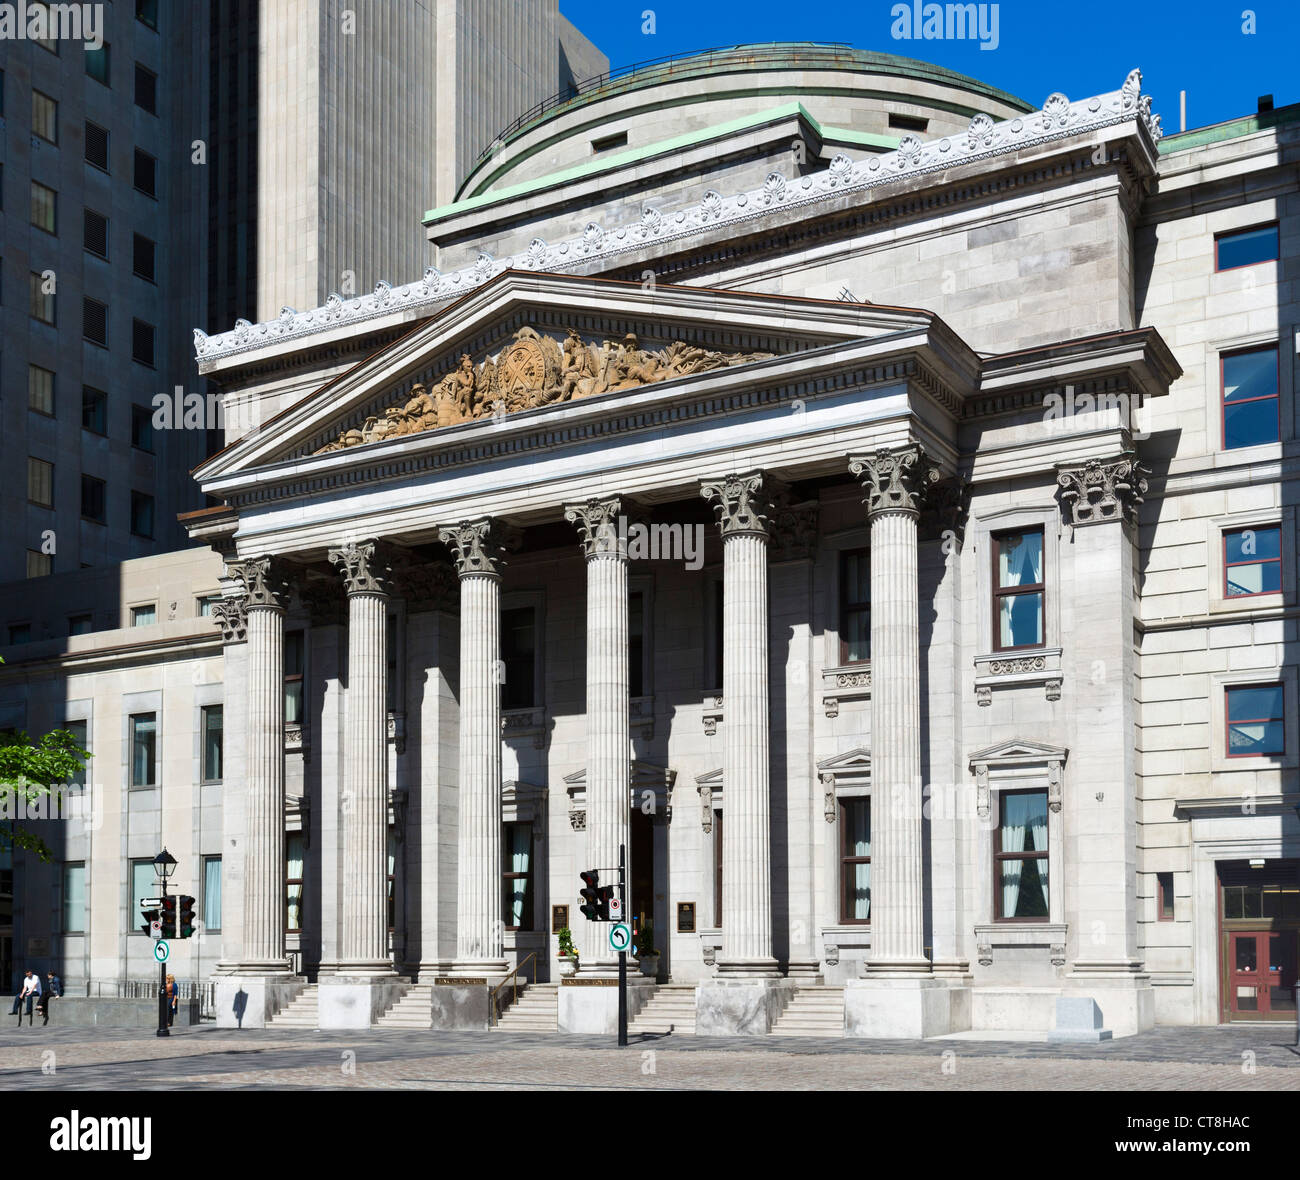 The Bank of Montreal building on the Place d'Armes, Rue Saint-Jacques, Montreal, Quebec, Canada Stock Photo